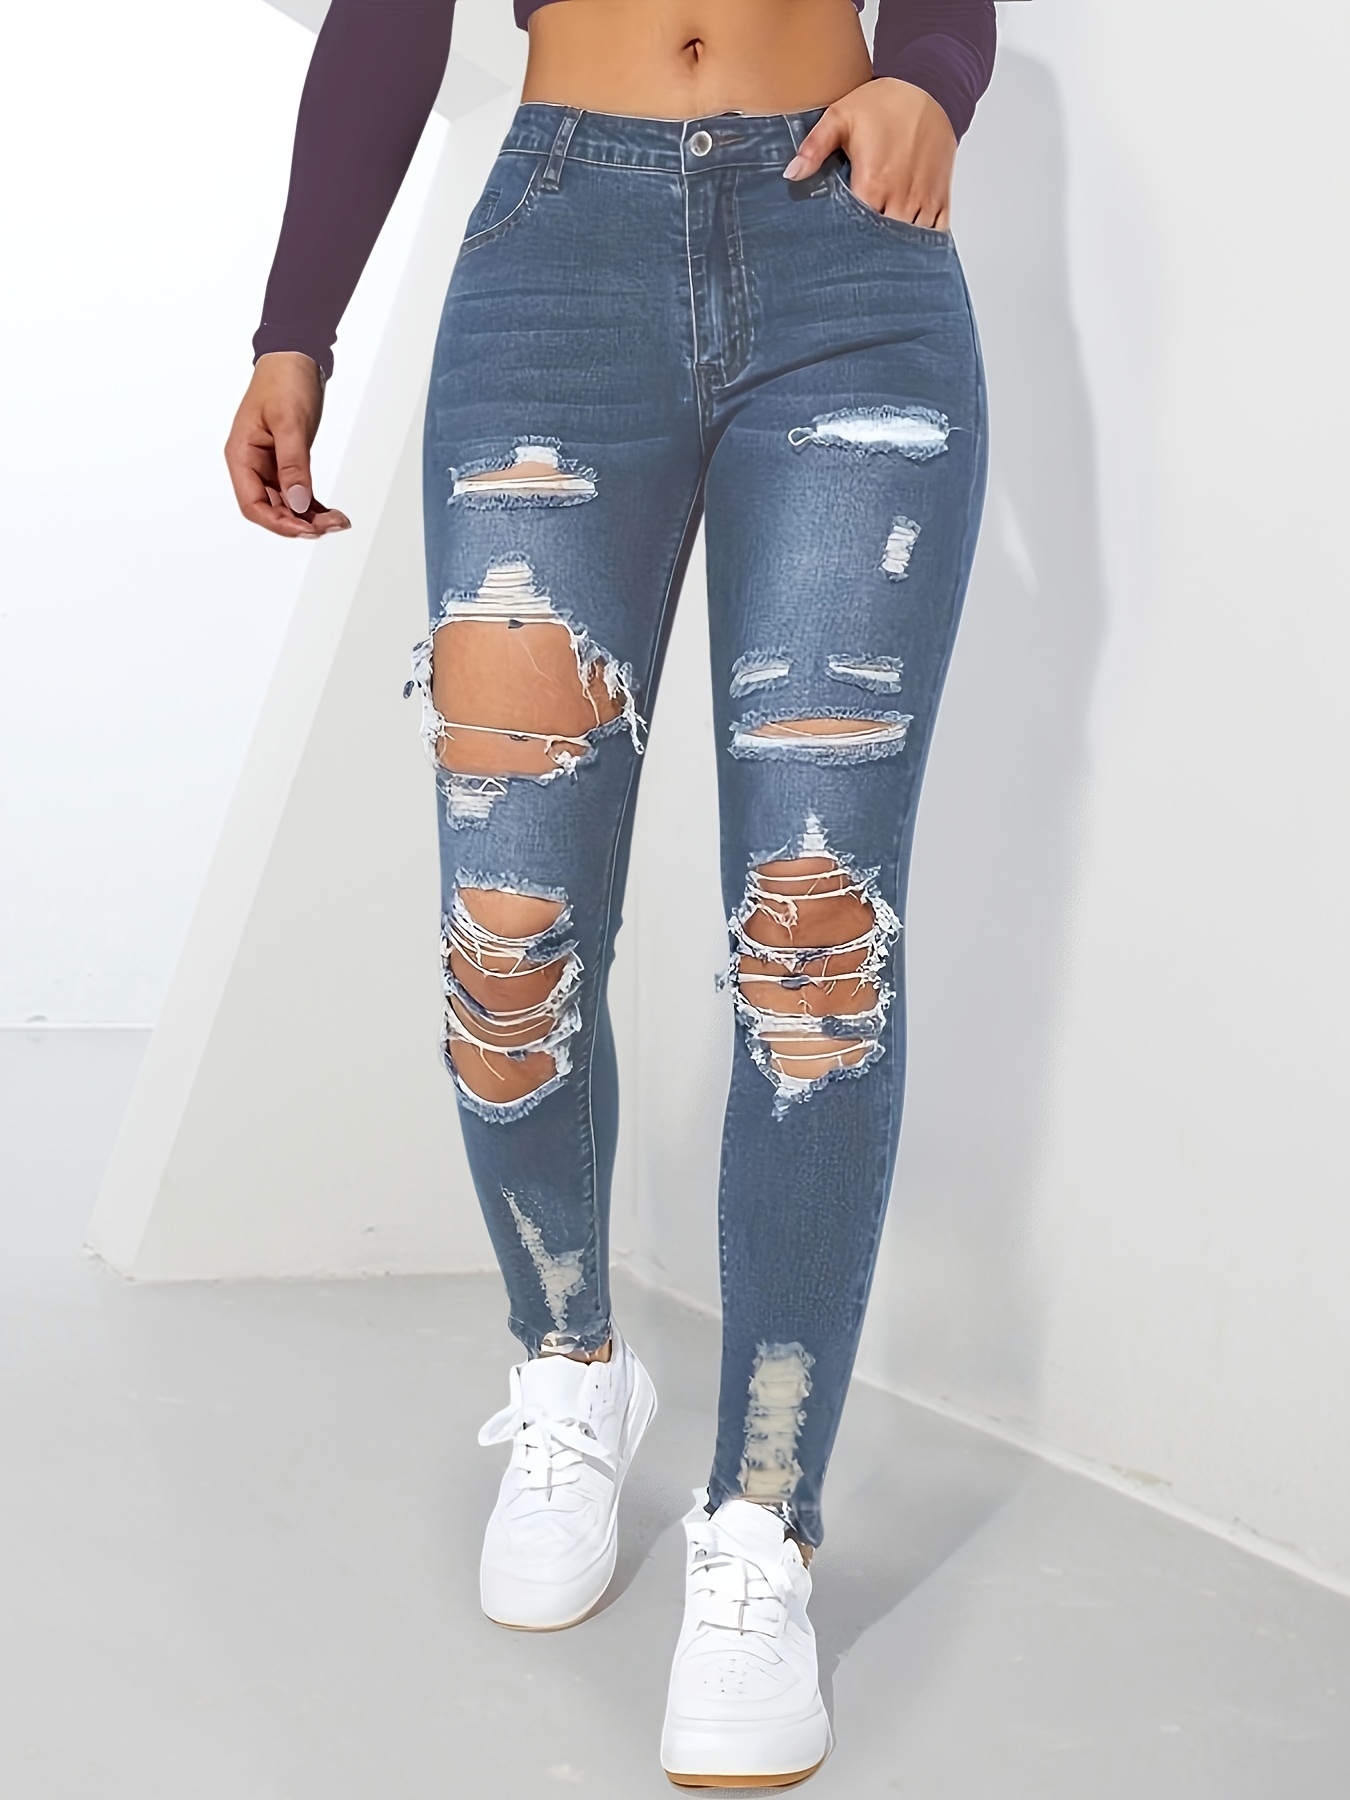 Distressed Denim Ripped Jeggings in Navy - Women's